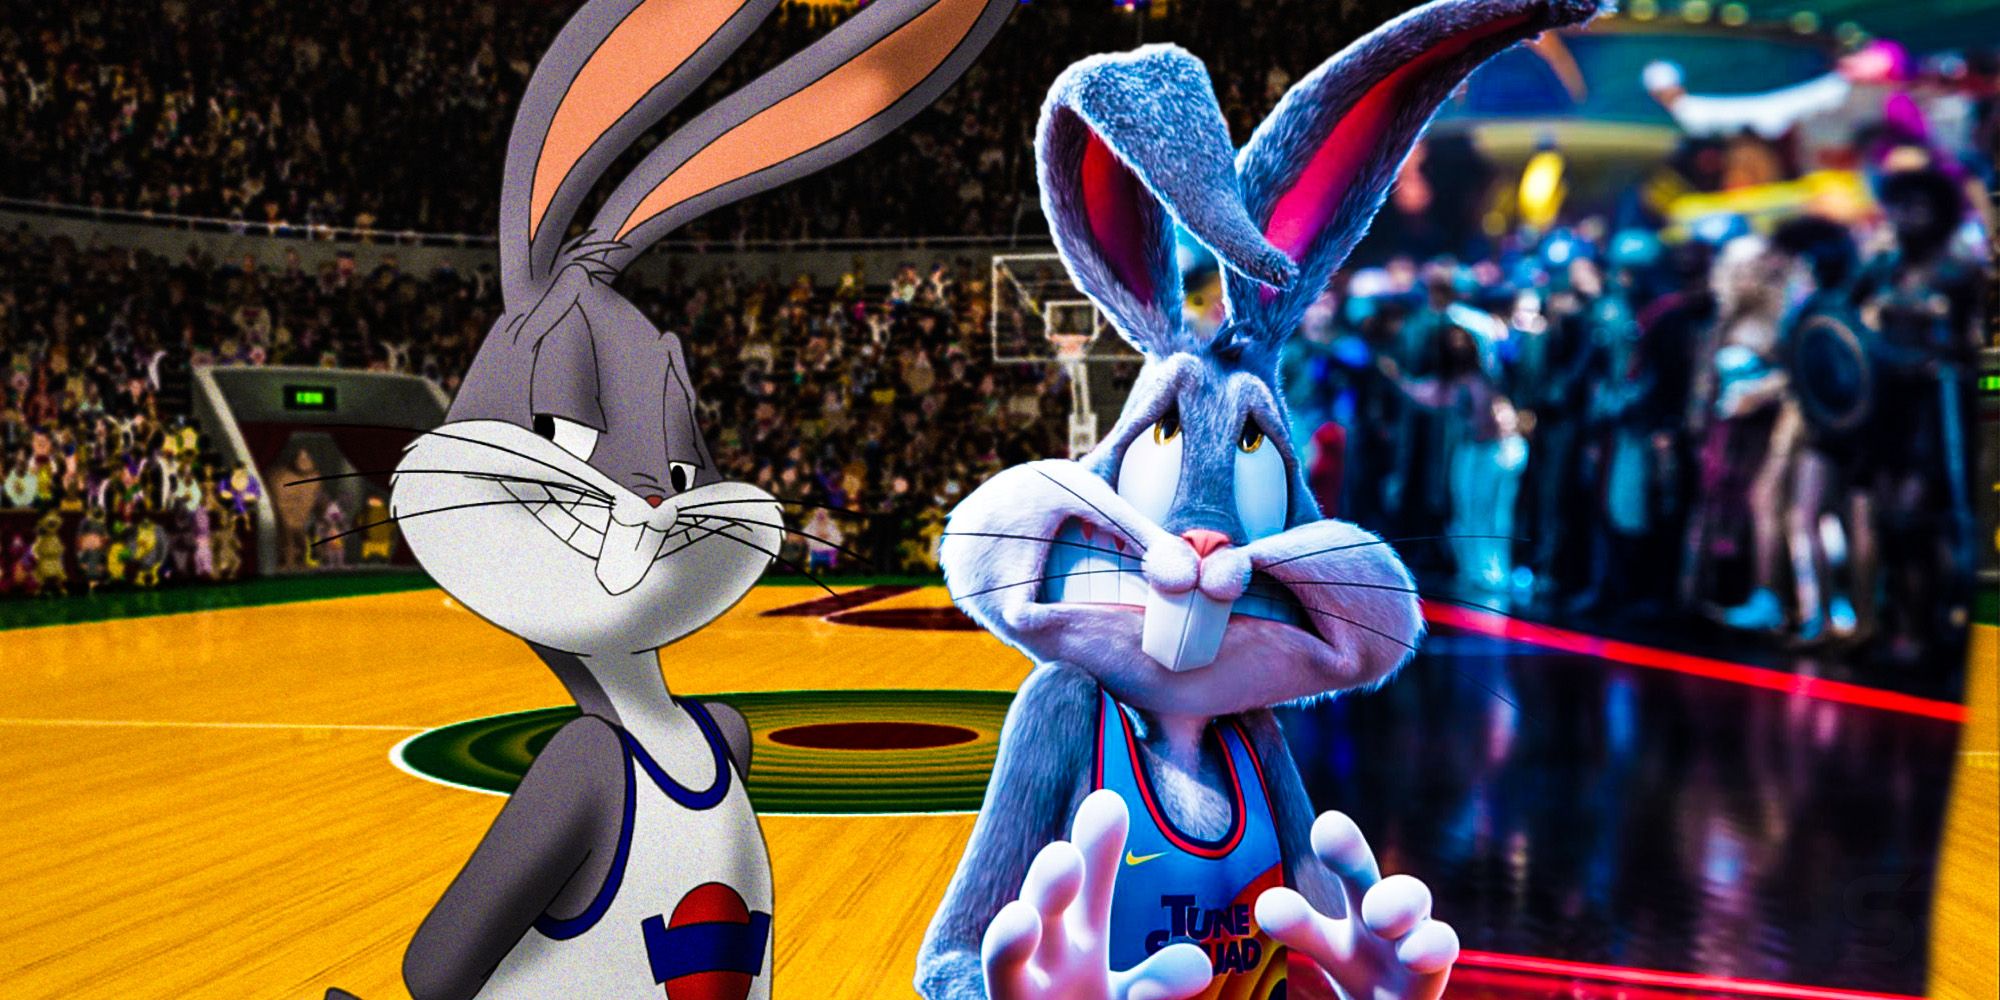 space jam characters